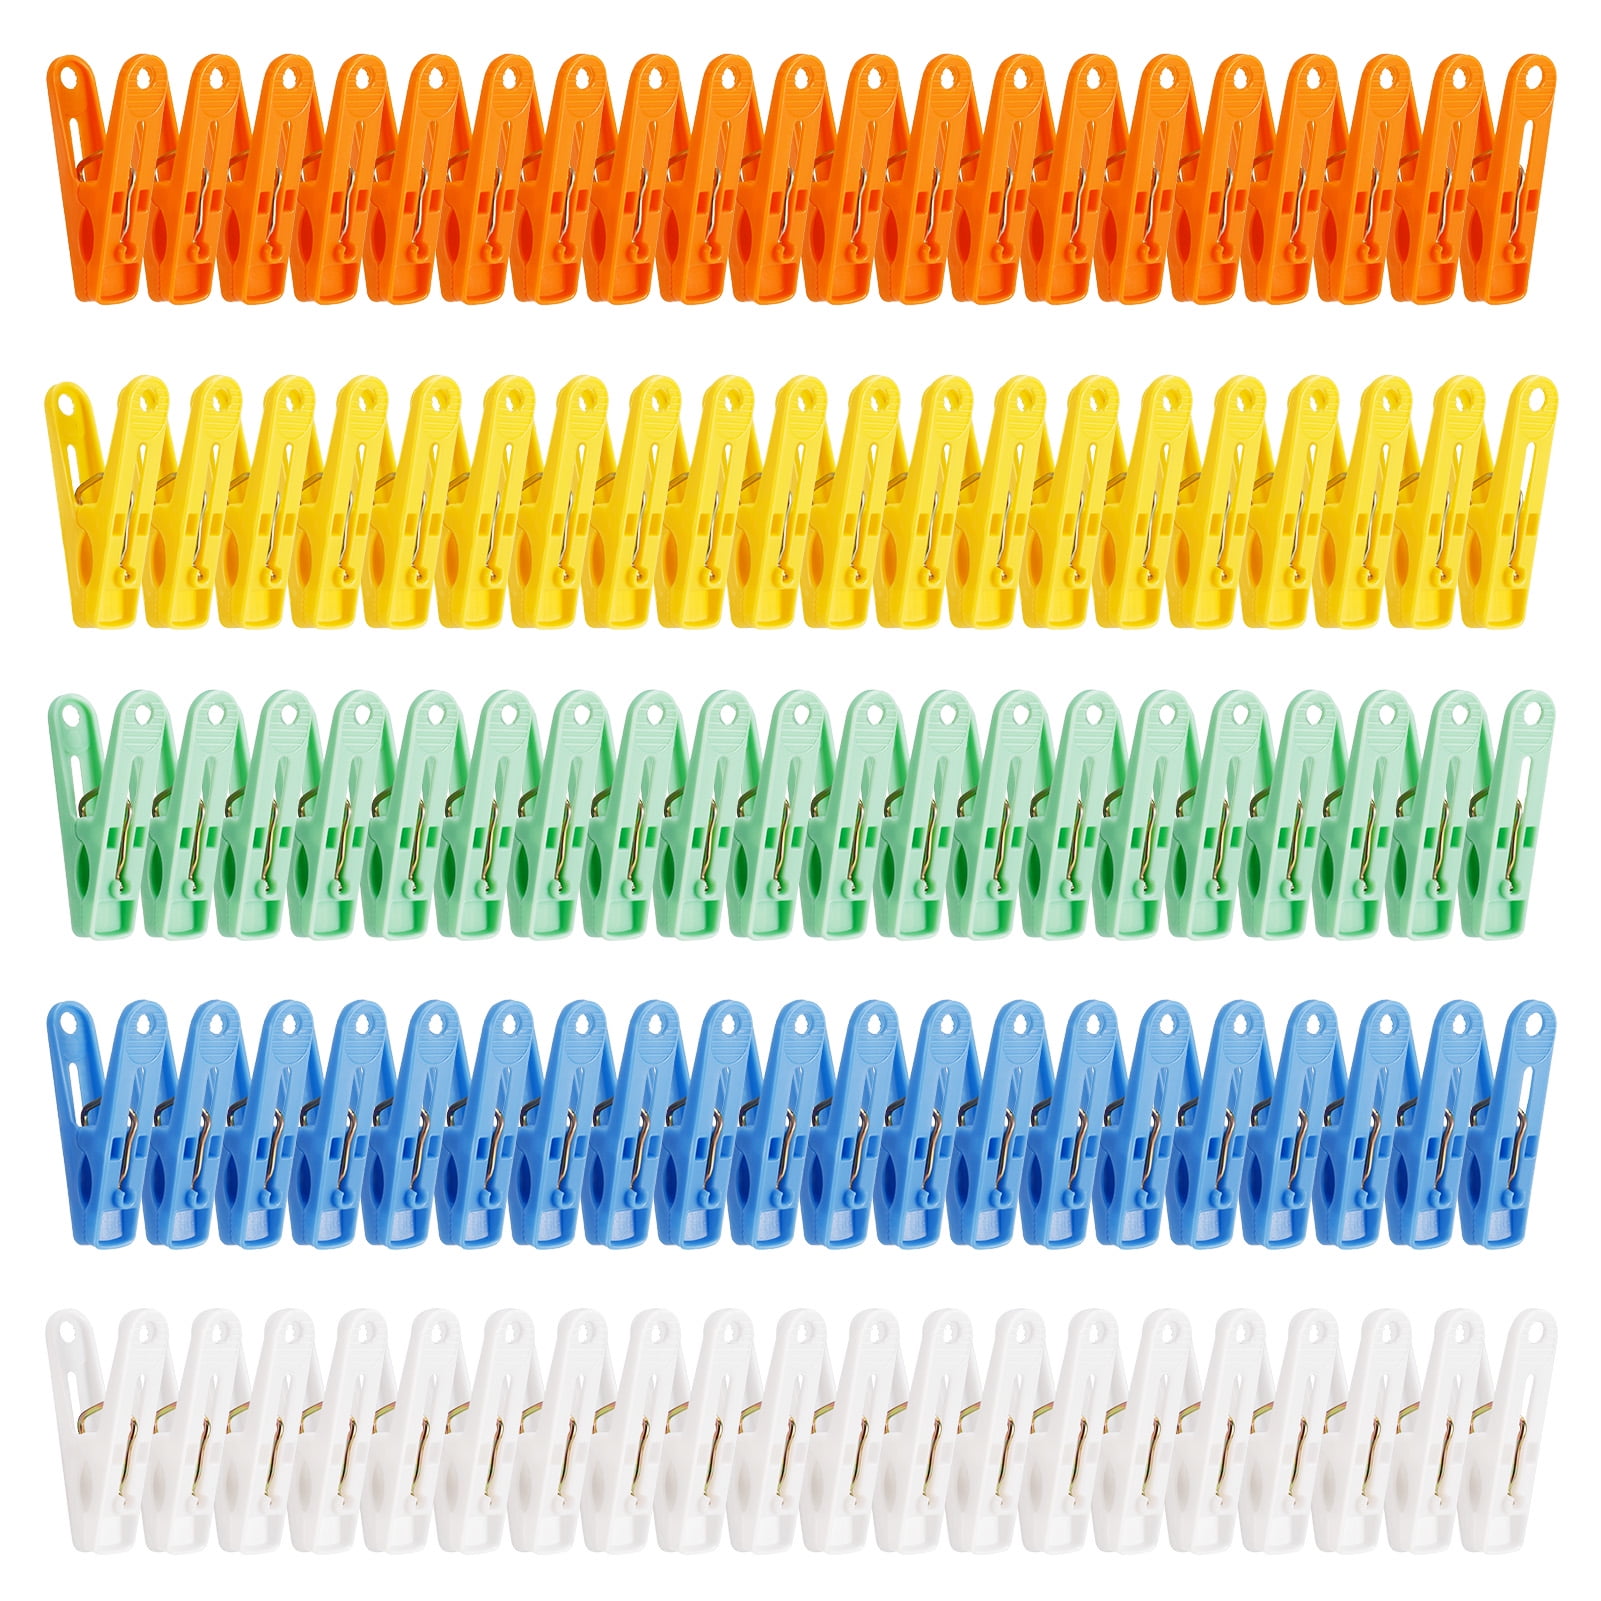 Clothes Pegs, 72Packs Clothes Pegs for Washing Line, Strong Grip Washing  Pegs with Multicolors, Rust Resistant Plastic Clothes Pegs, Laundry Pegs  Non